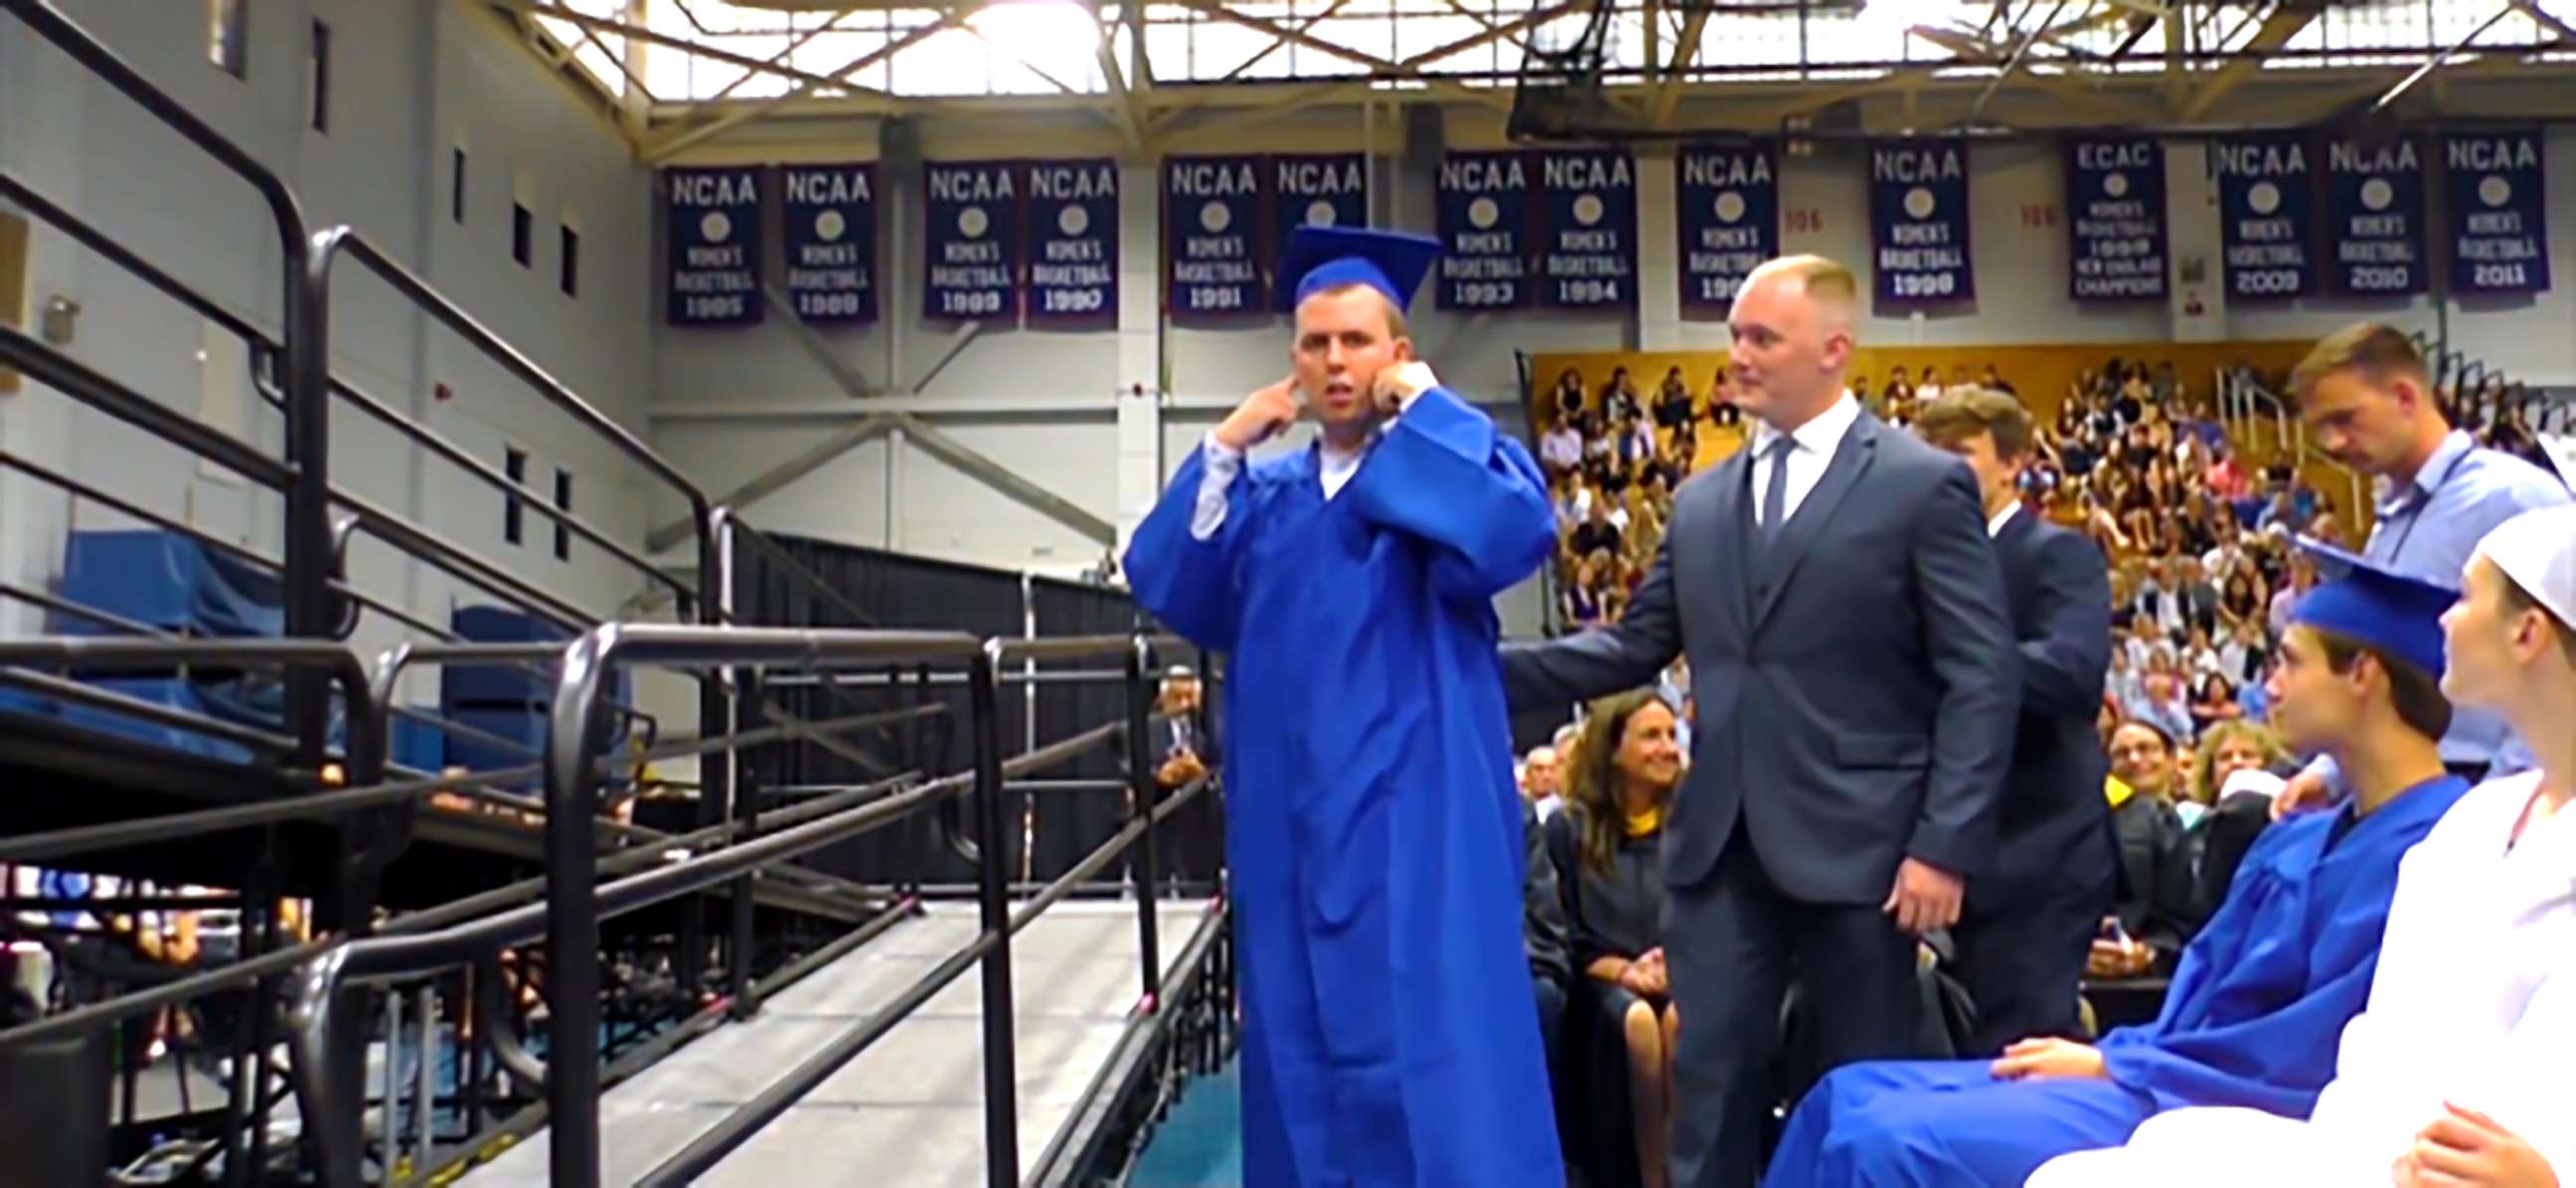 PHOTO: Jacks walks to the stage in complete silence to receive his diploma.